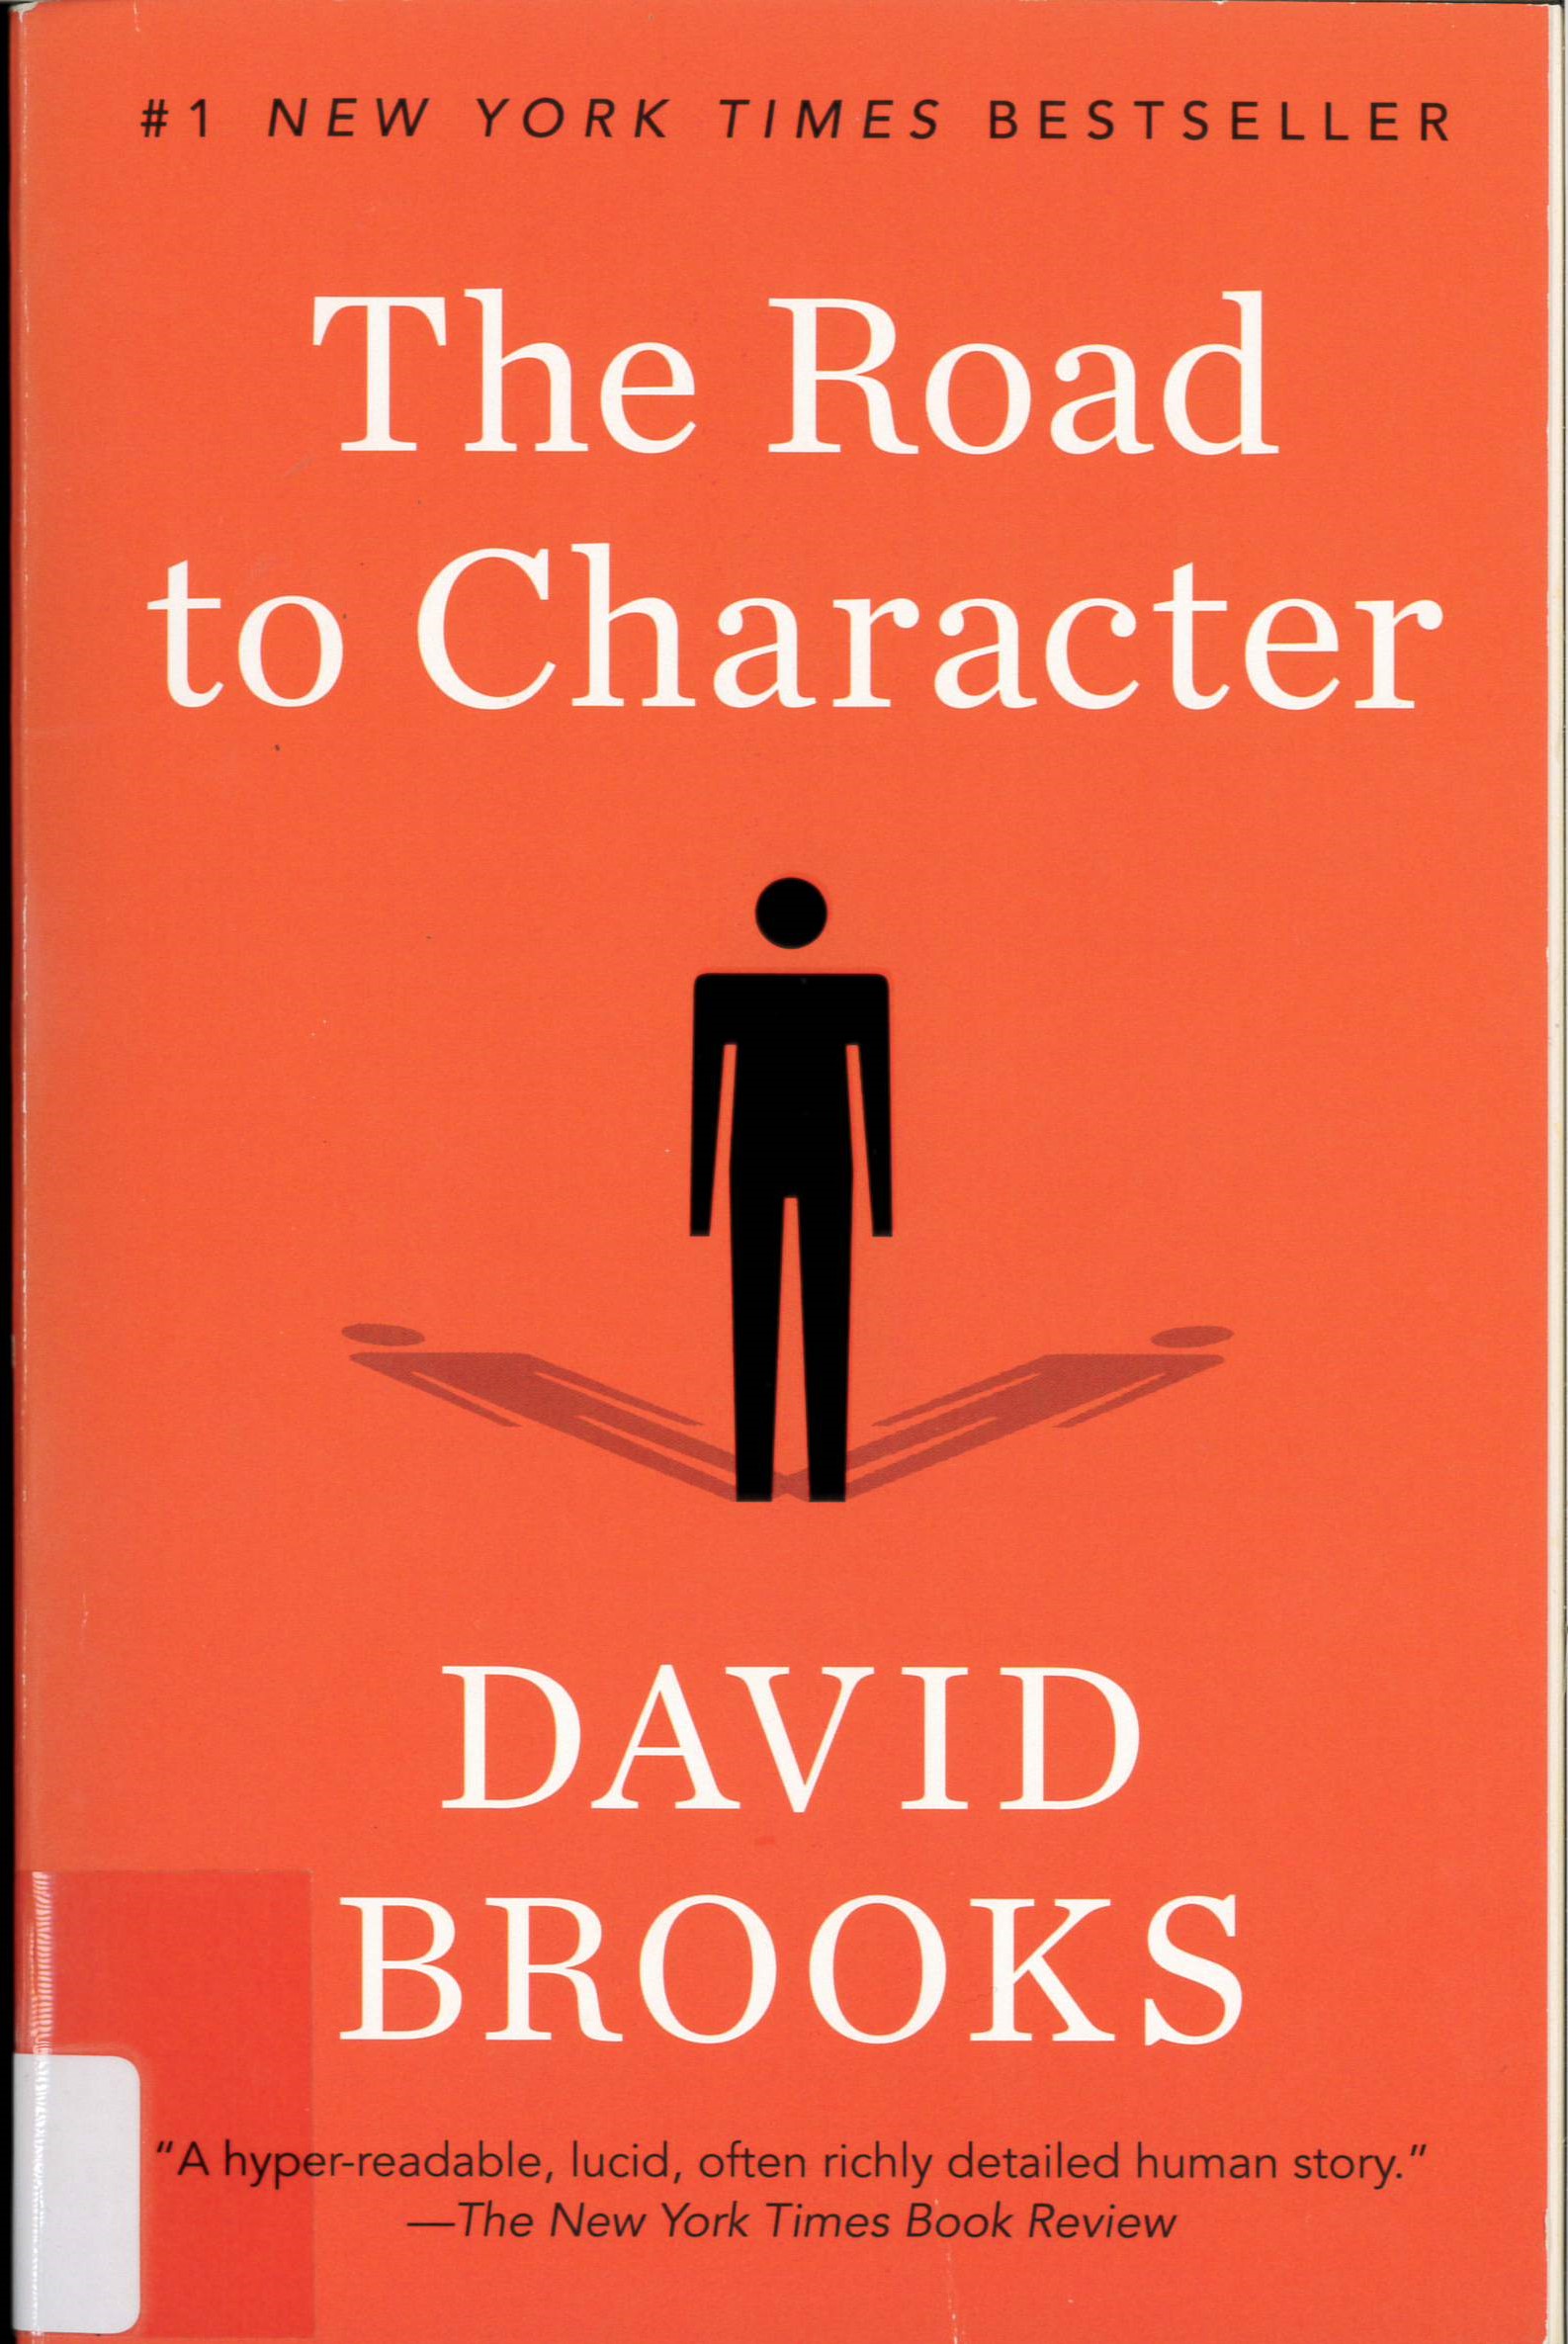 The road to character